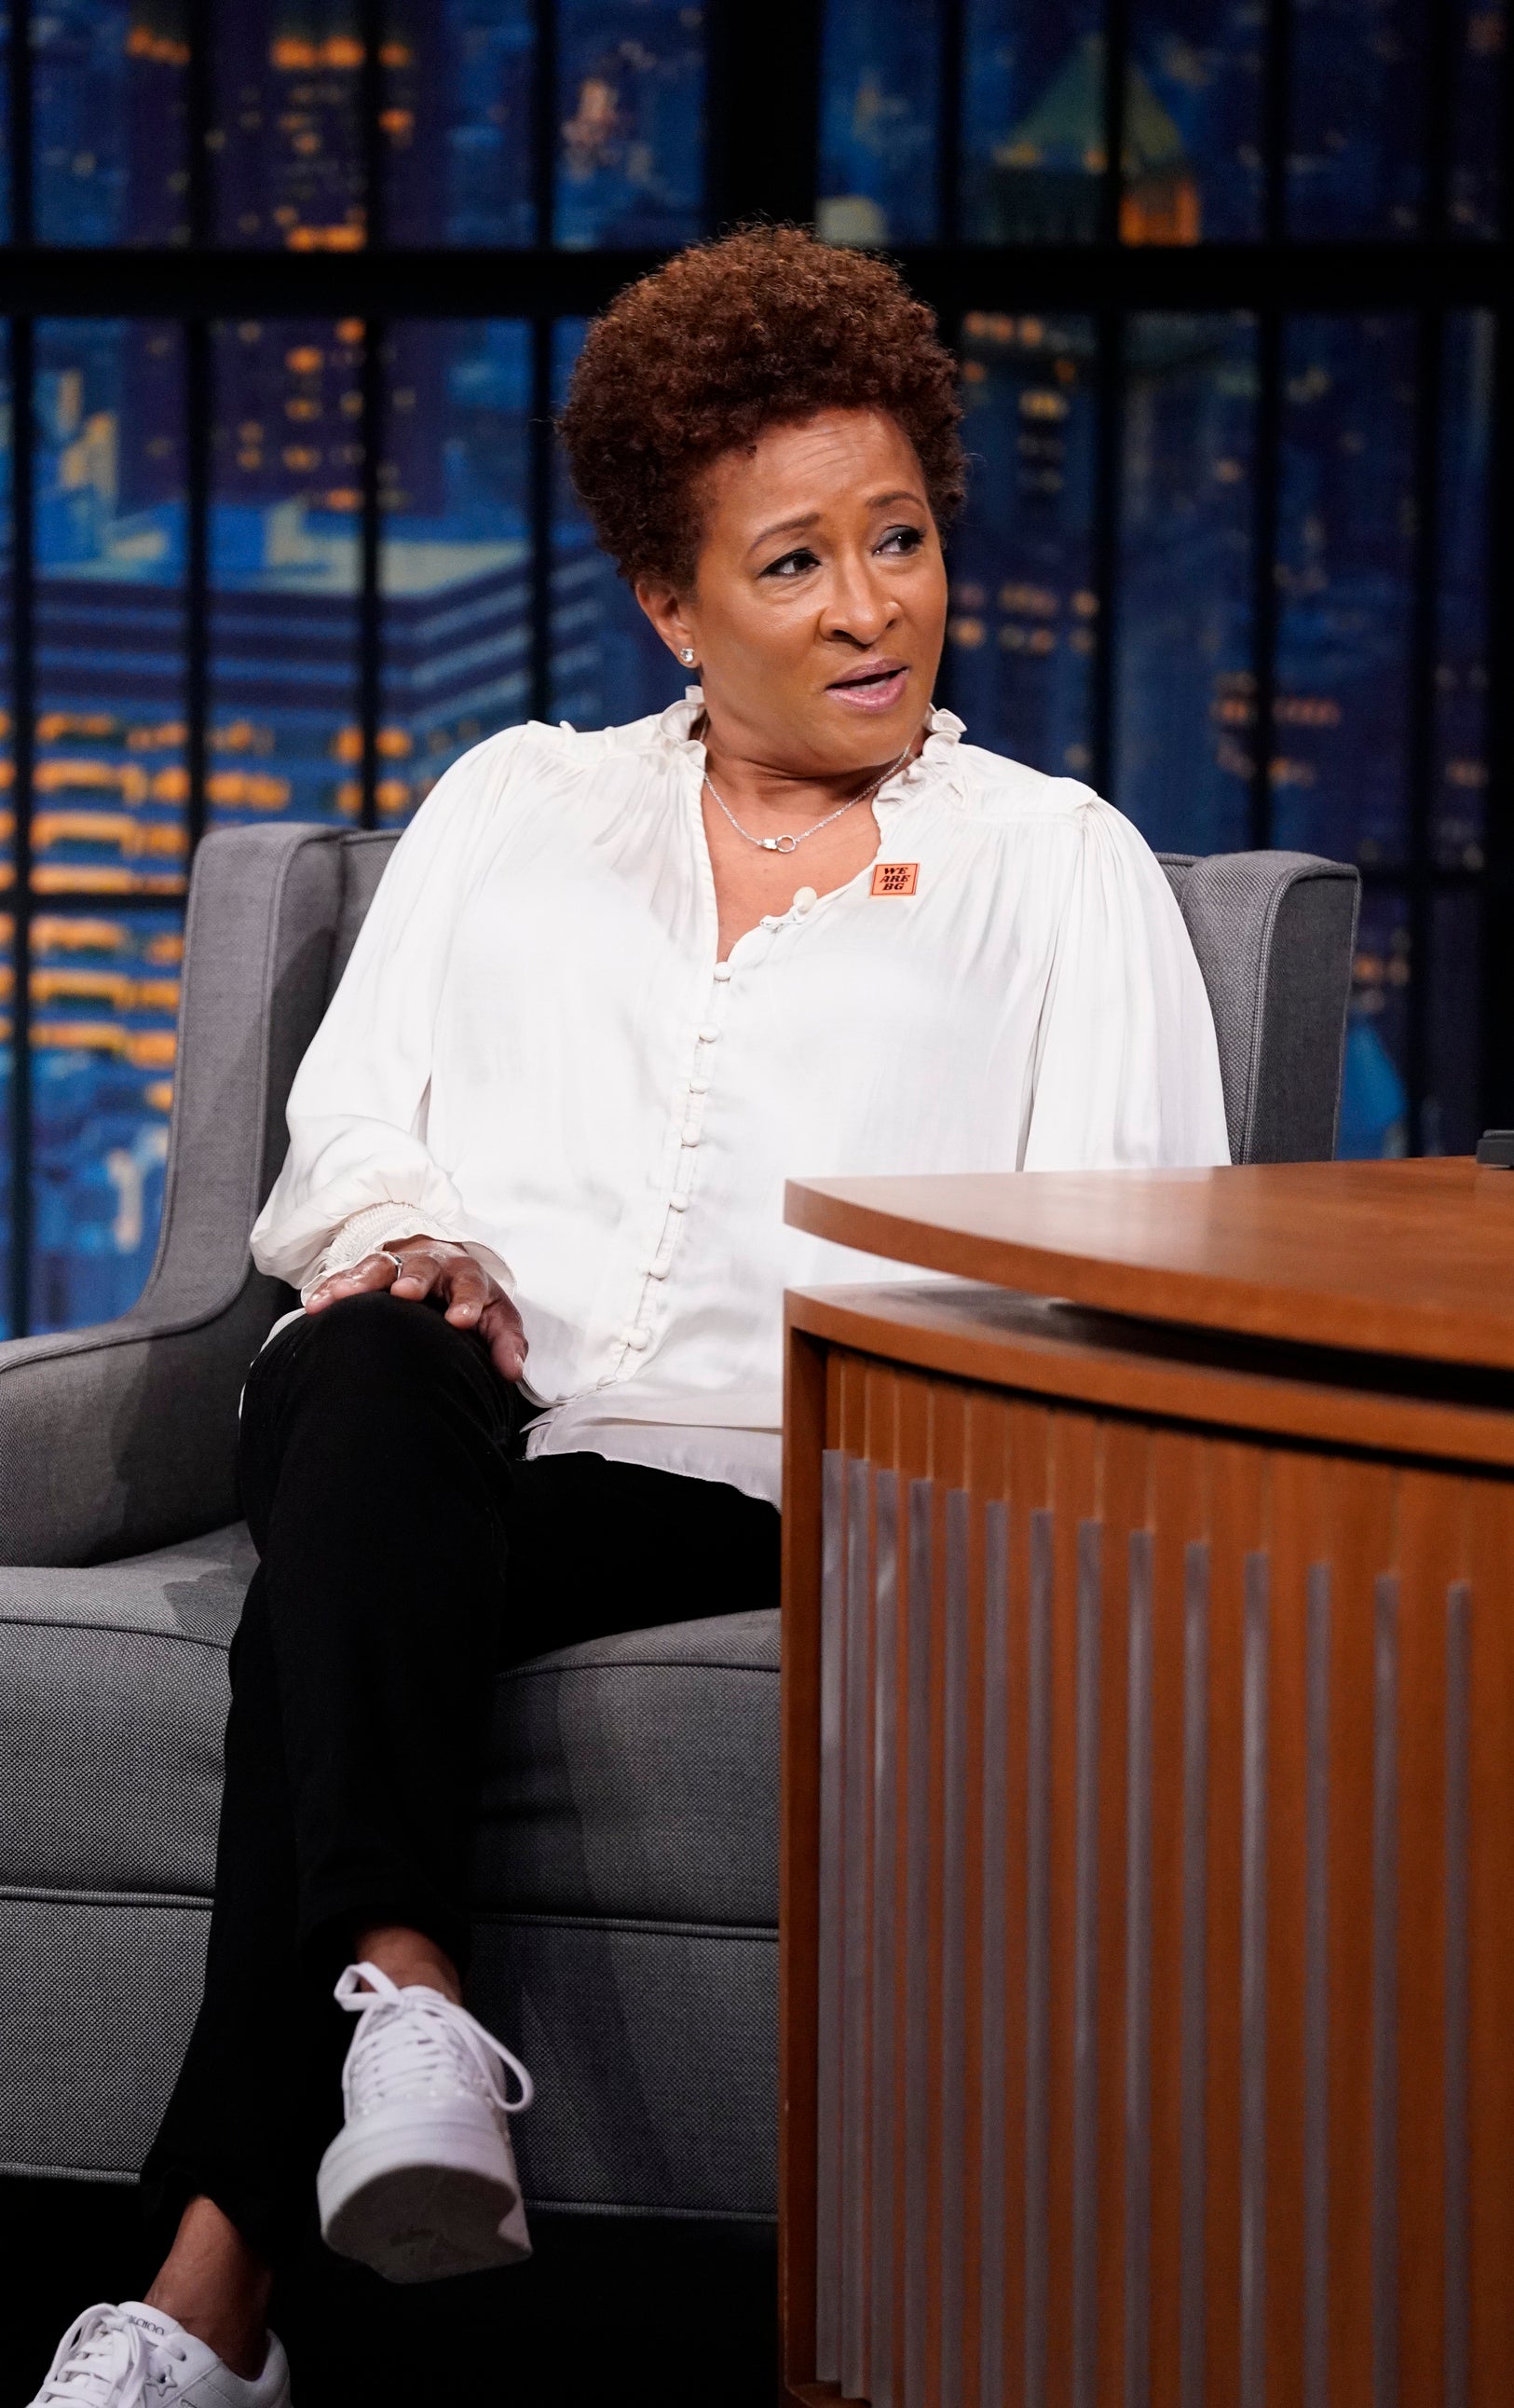 Wanda Sykes in a blouse and pants sits on a talk show chair, expressing a point